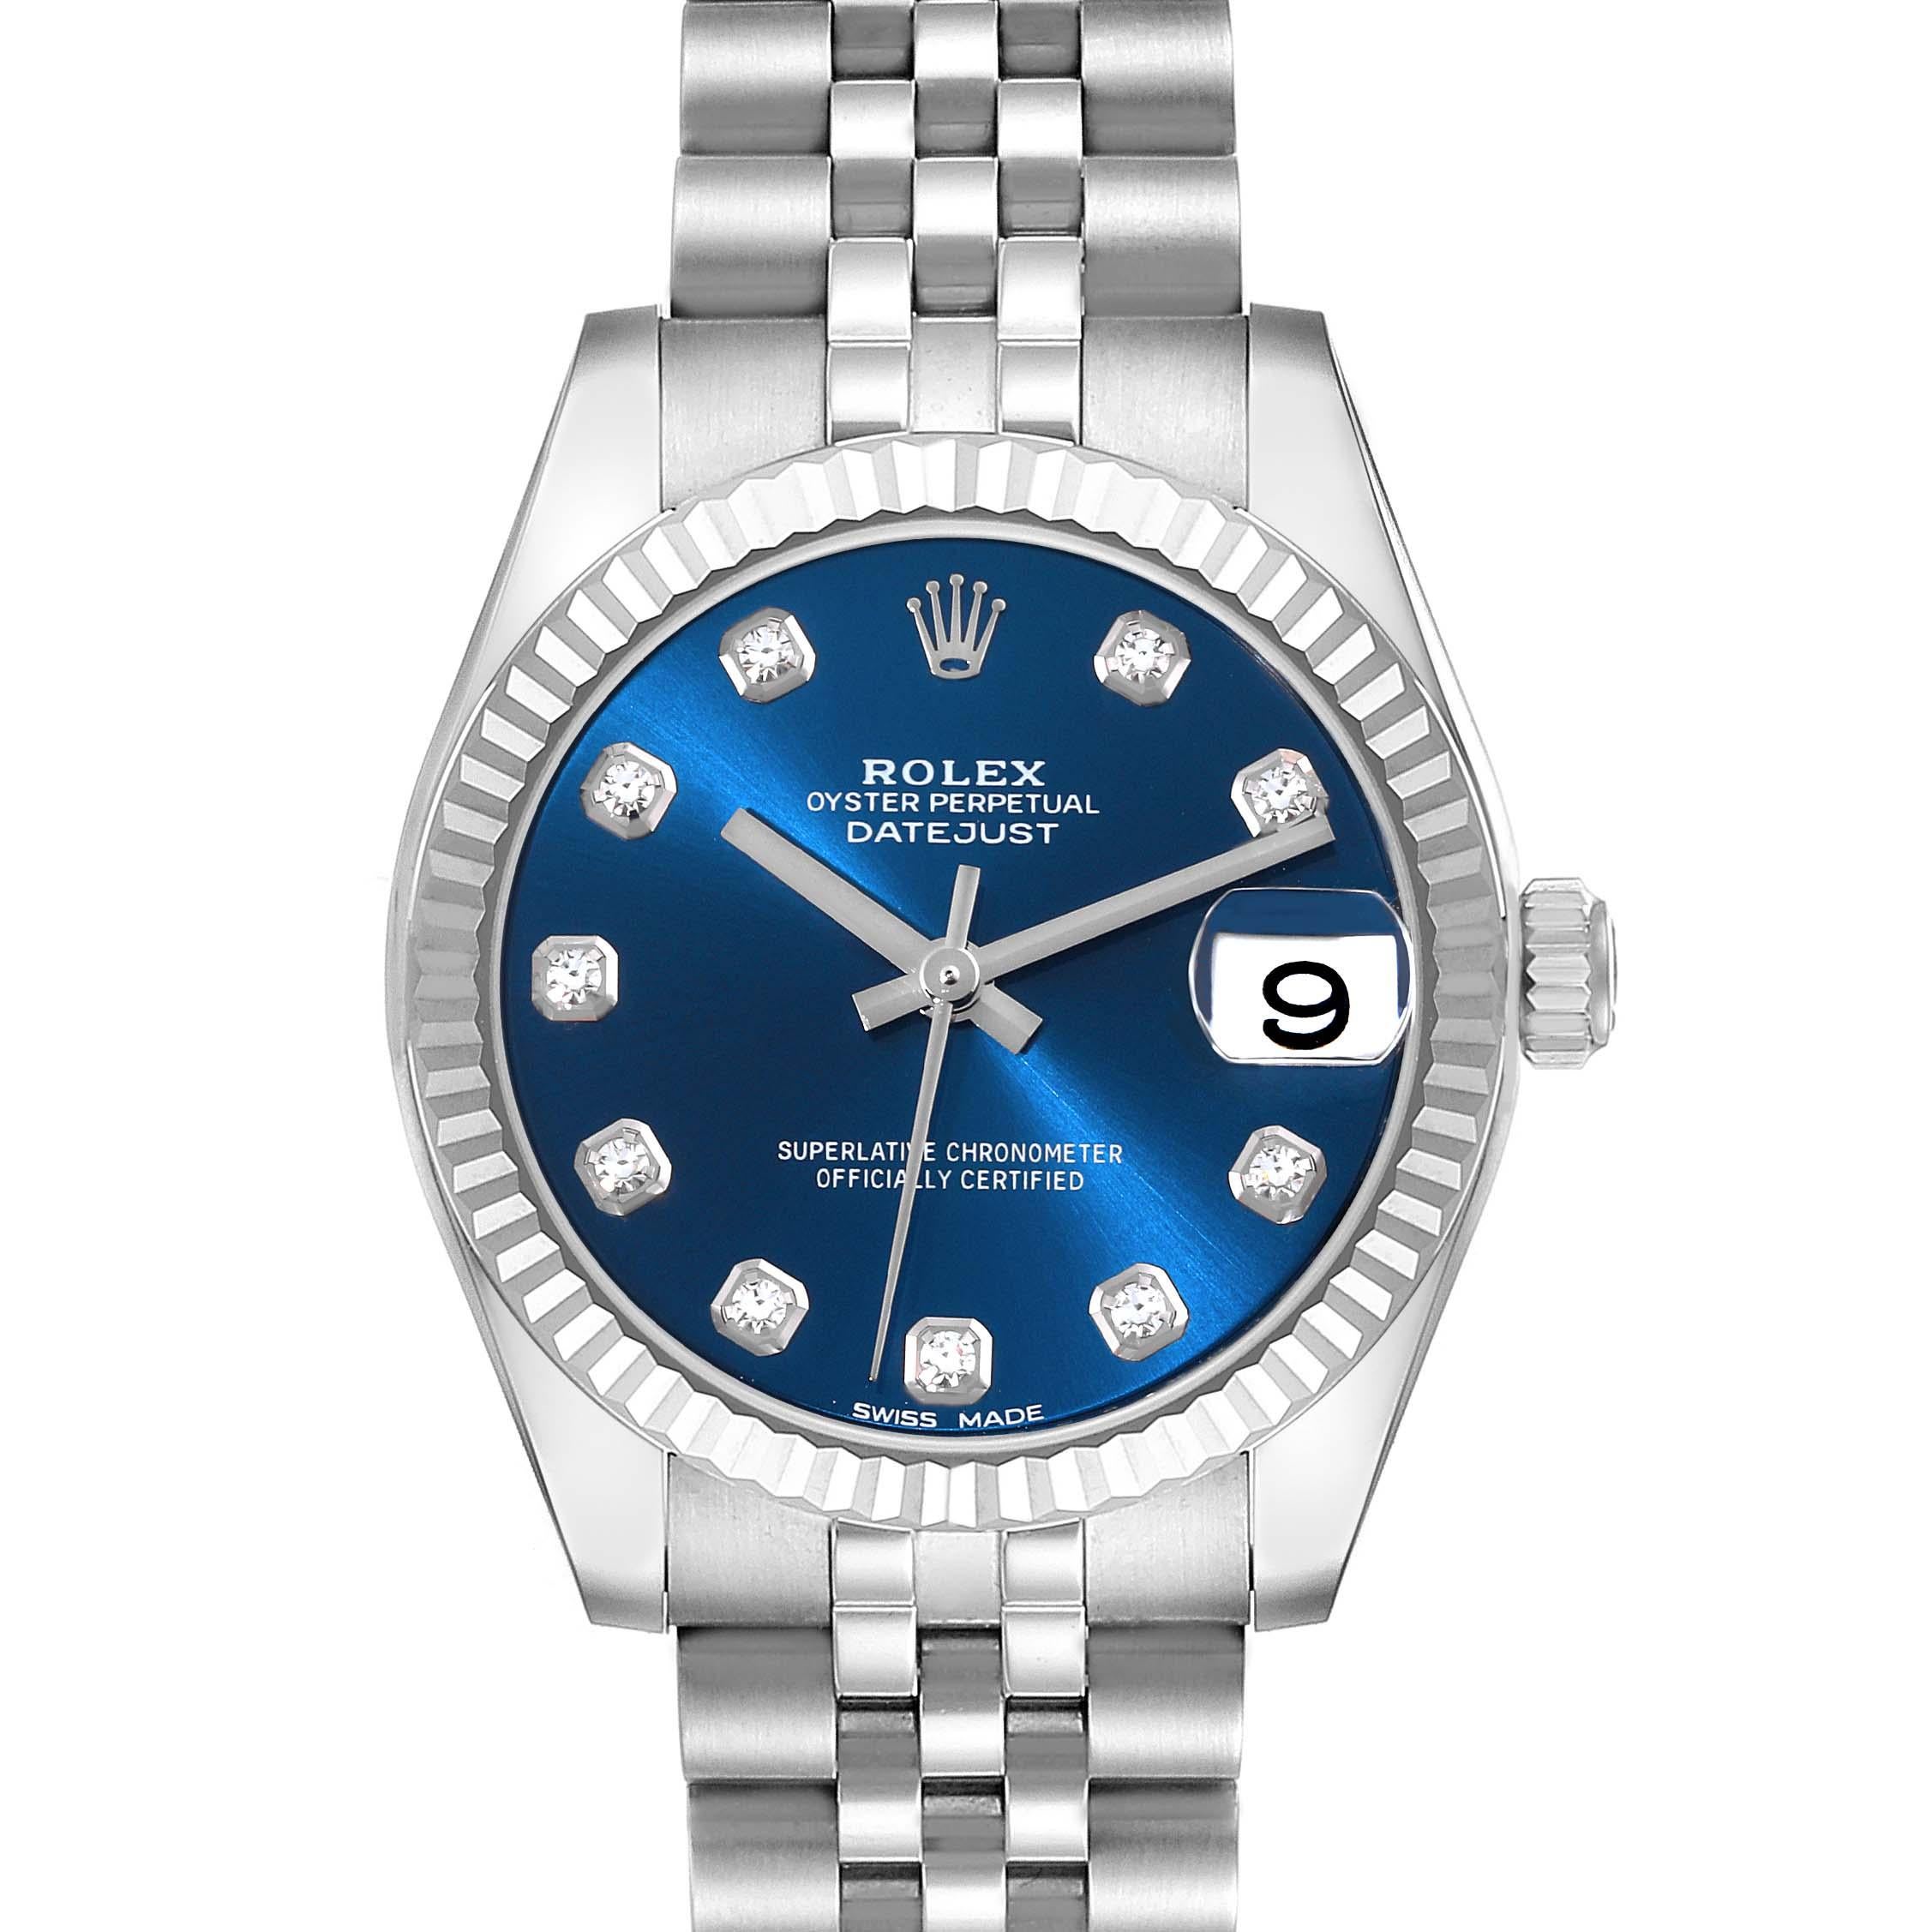 Rolex Datejust Midsize Steel White Gold Blue Diamond Dial Ladies Watch 178274. Officially certified chronometer automatic self-winding movement. Stainless steel oyster case 31.0 mm in diameter. Rolex logo on the crown. 18k white gold fluted bezel.